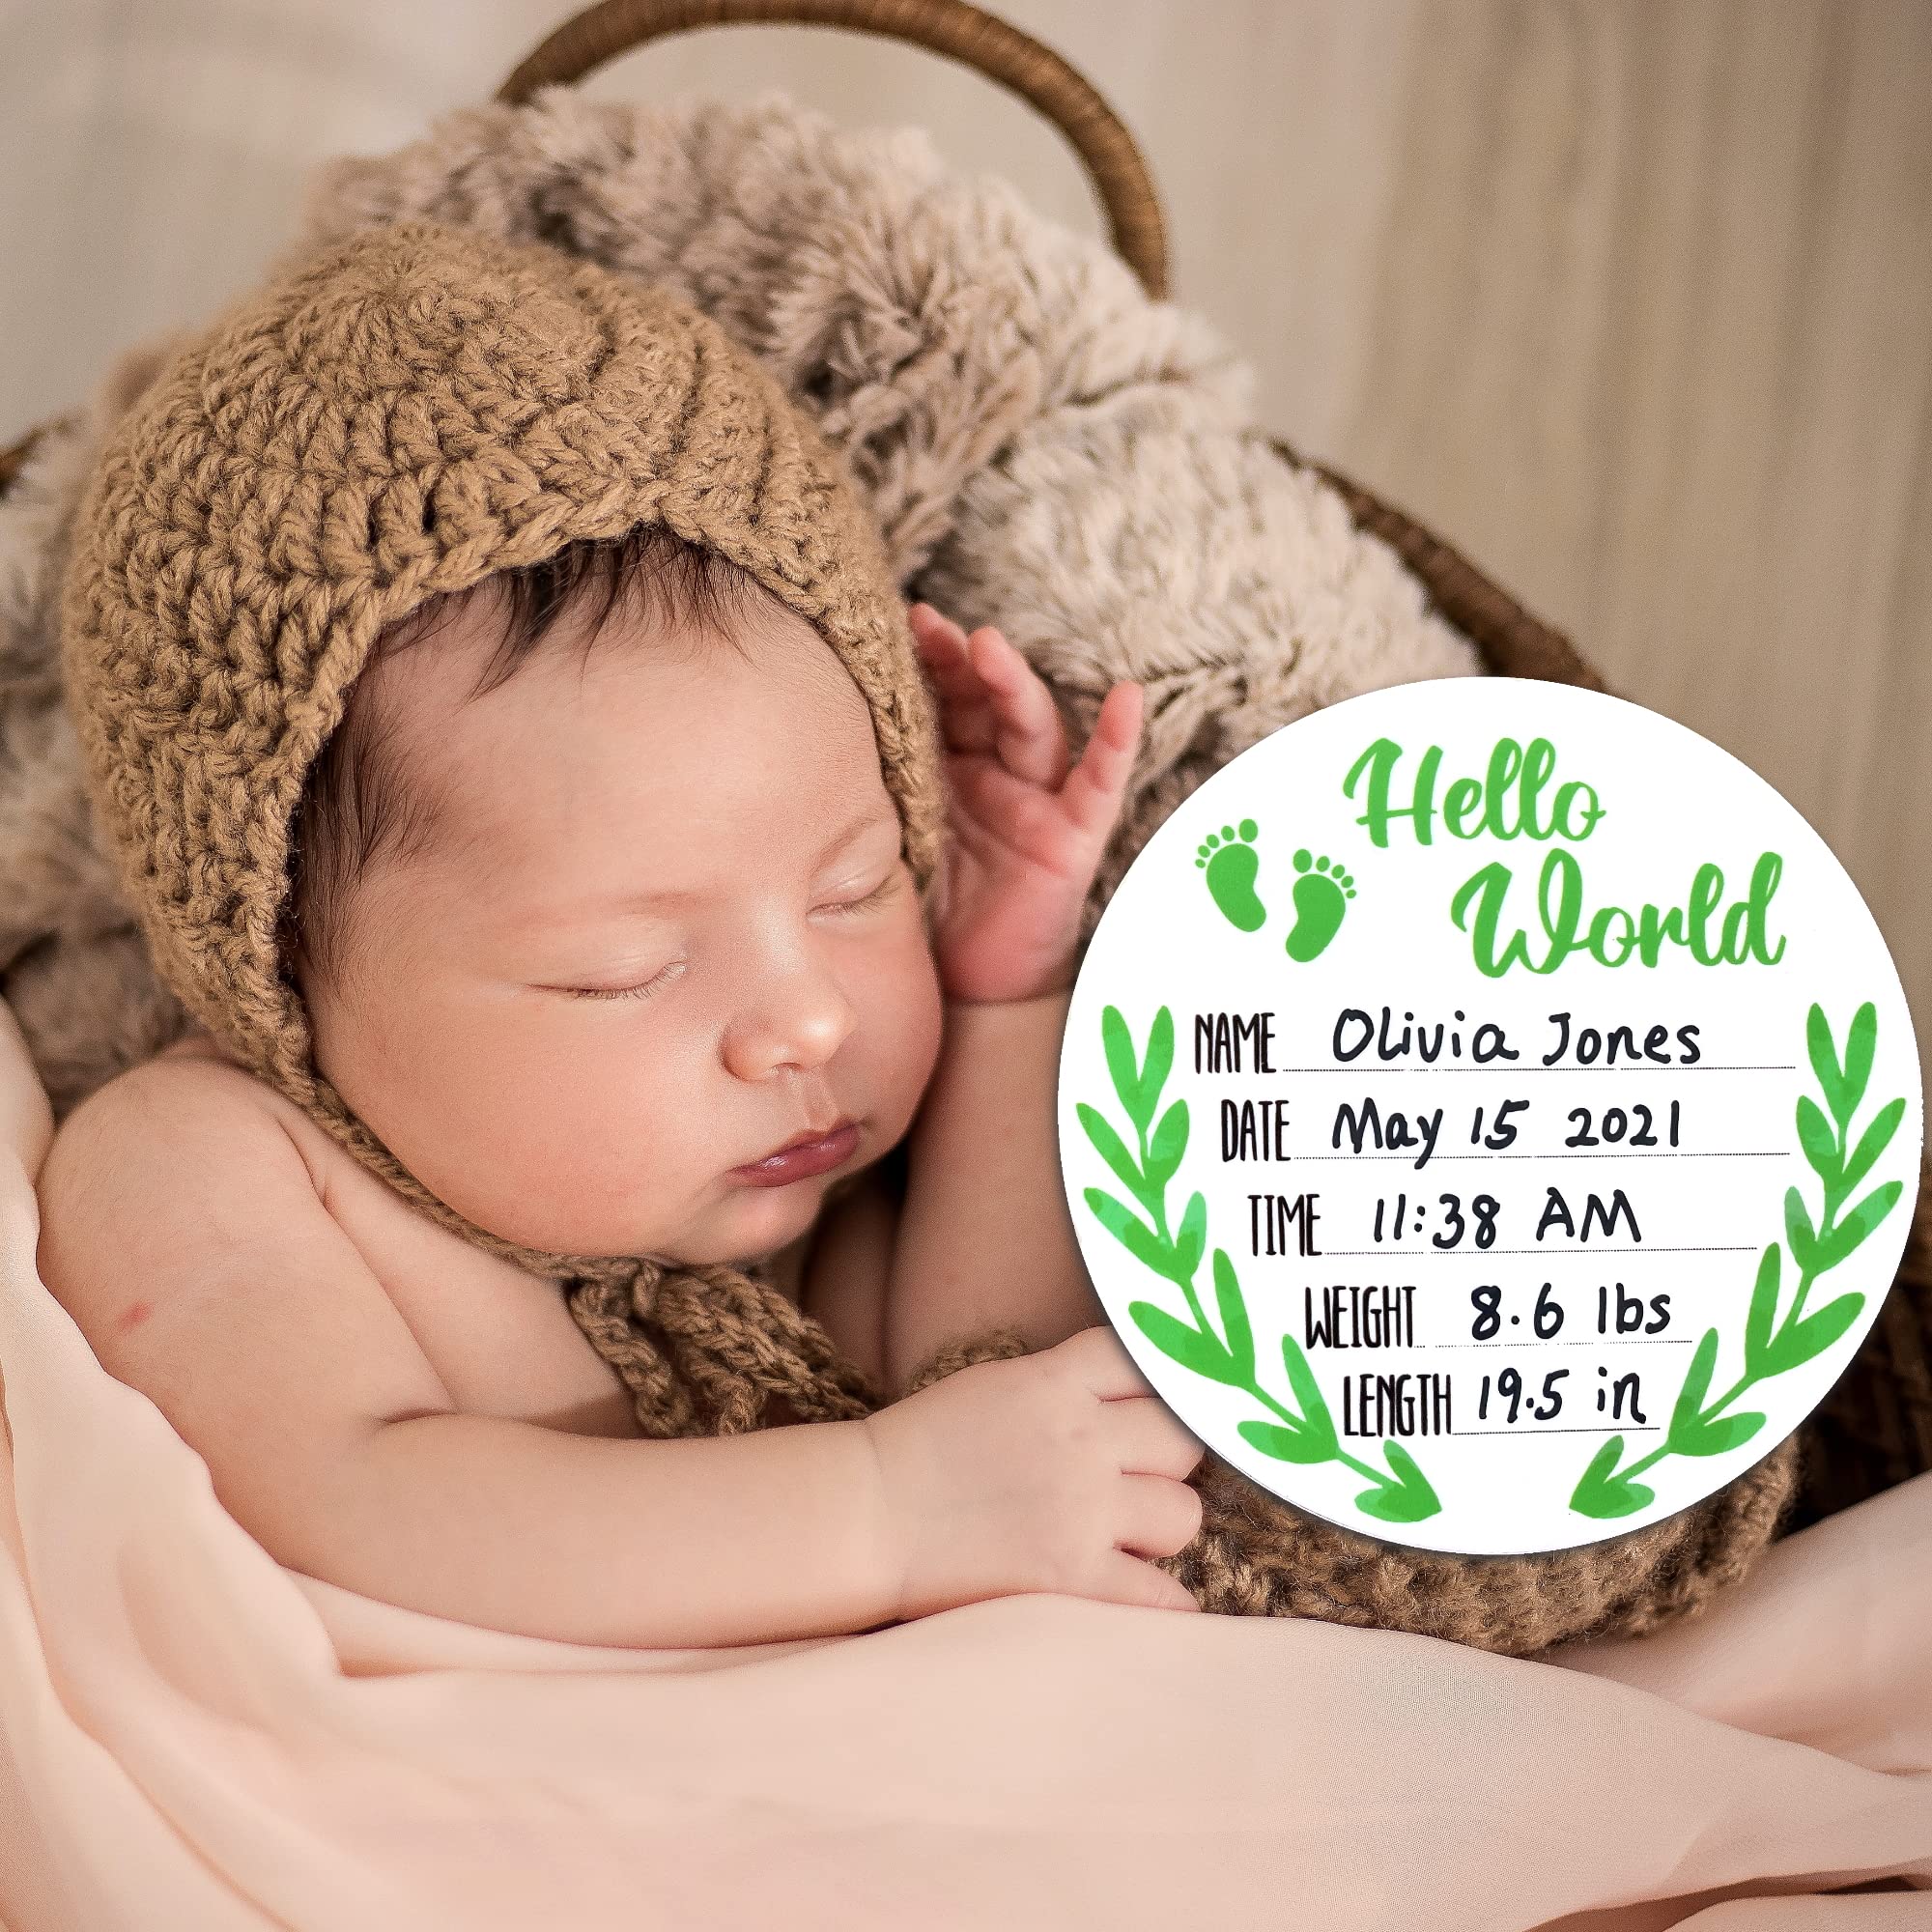 Birth Announcement Board for New Baby - 6-Inch Round Baby Announcement Sign, Baby Shower Gifts, Newborn Gifts - Hello World Newborn Sign, Baby Photo Props, Reversible Baby Milestone Card